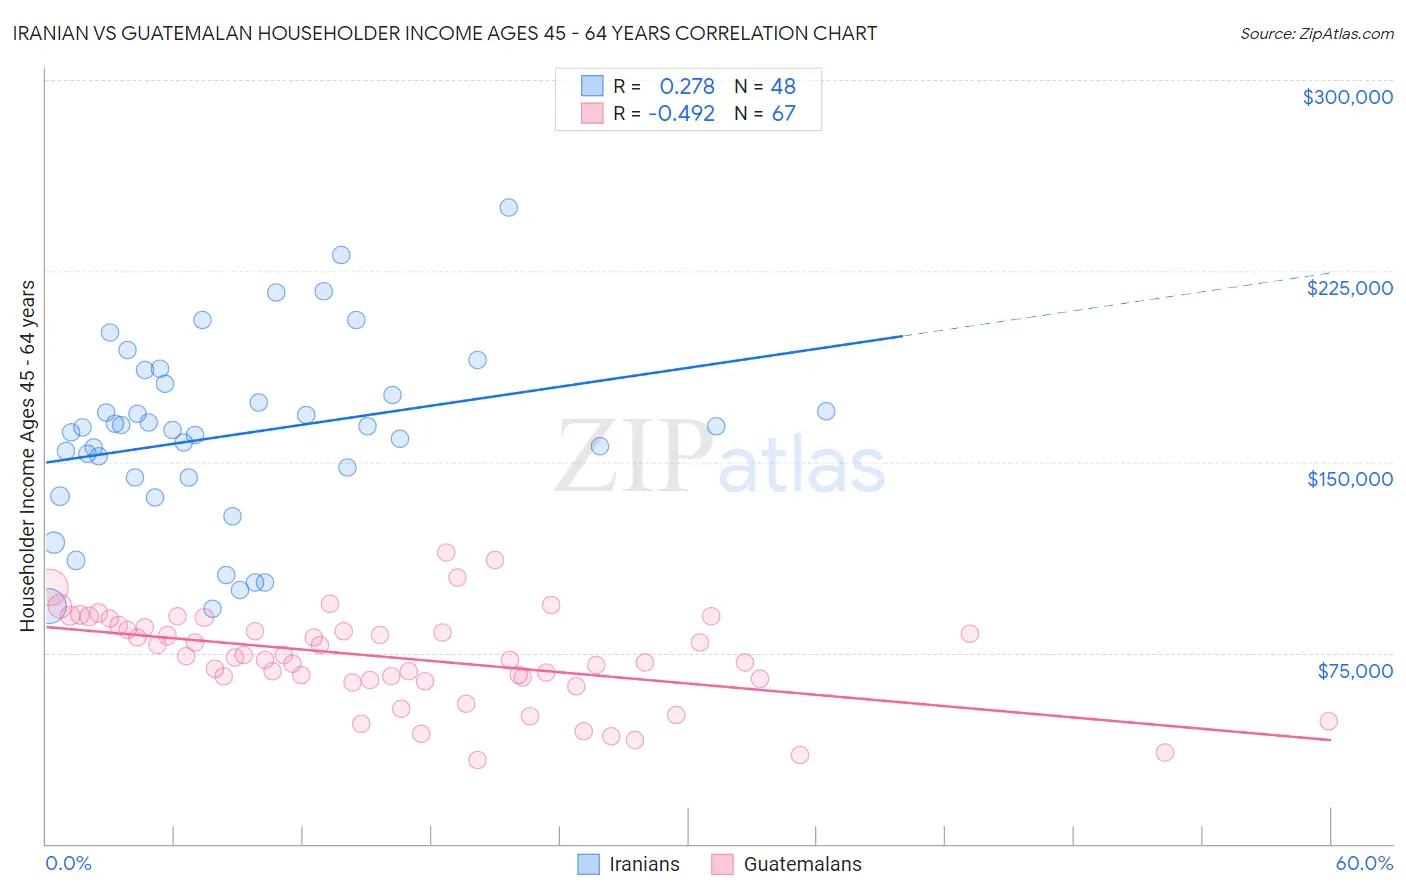 Iranian vs Guatemalan Householder Income Ages 45 - 64 years